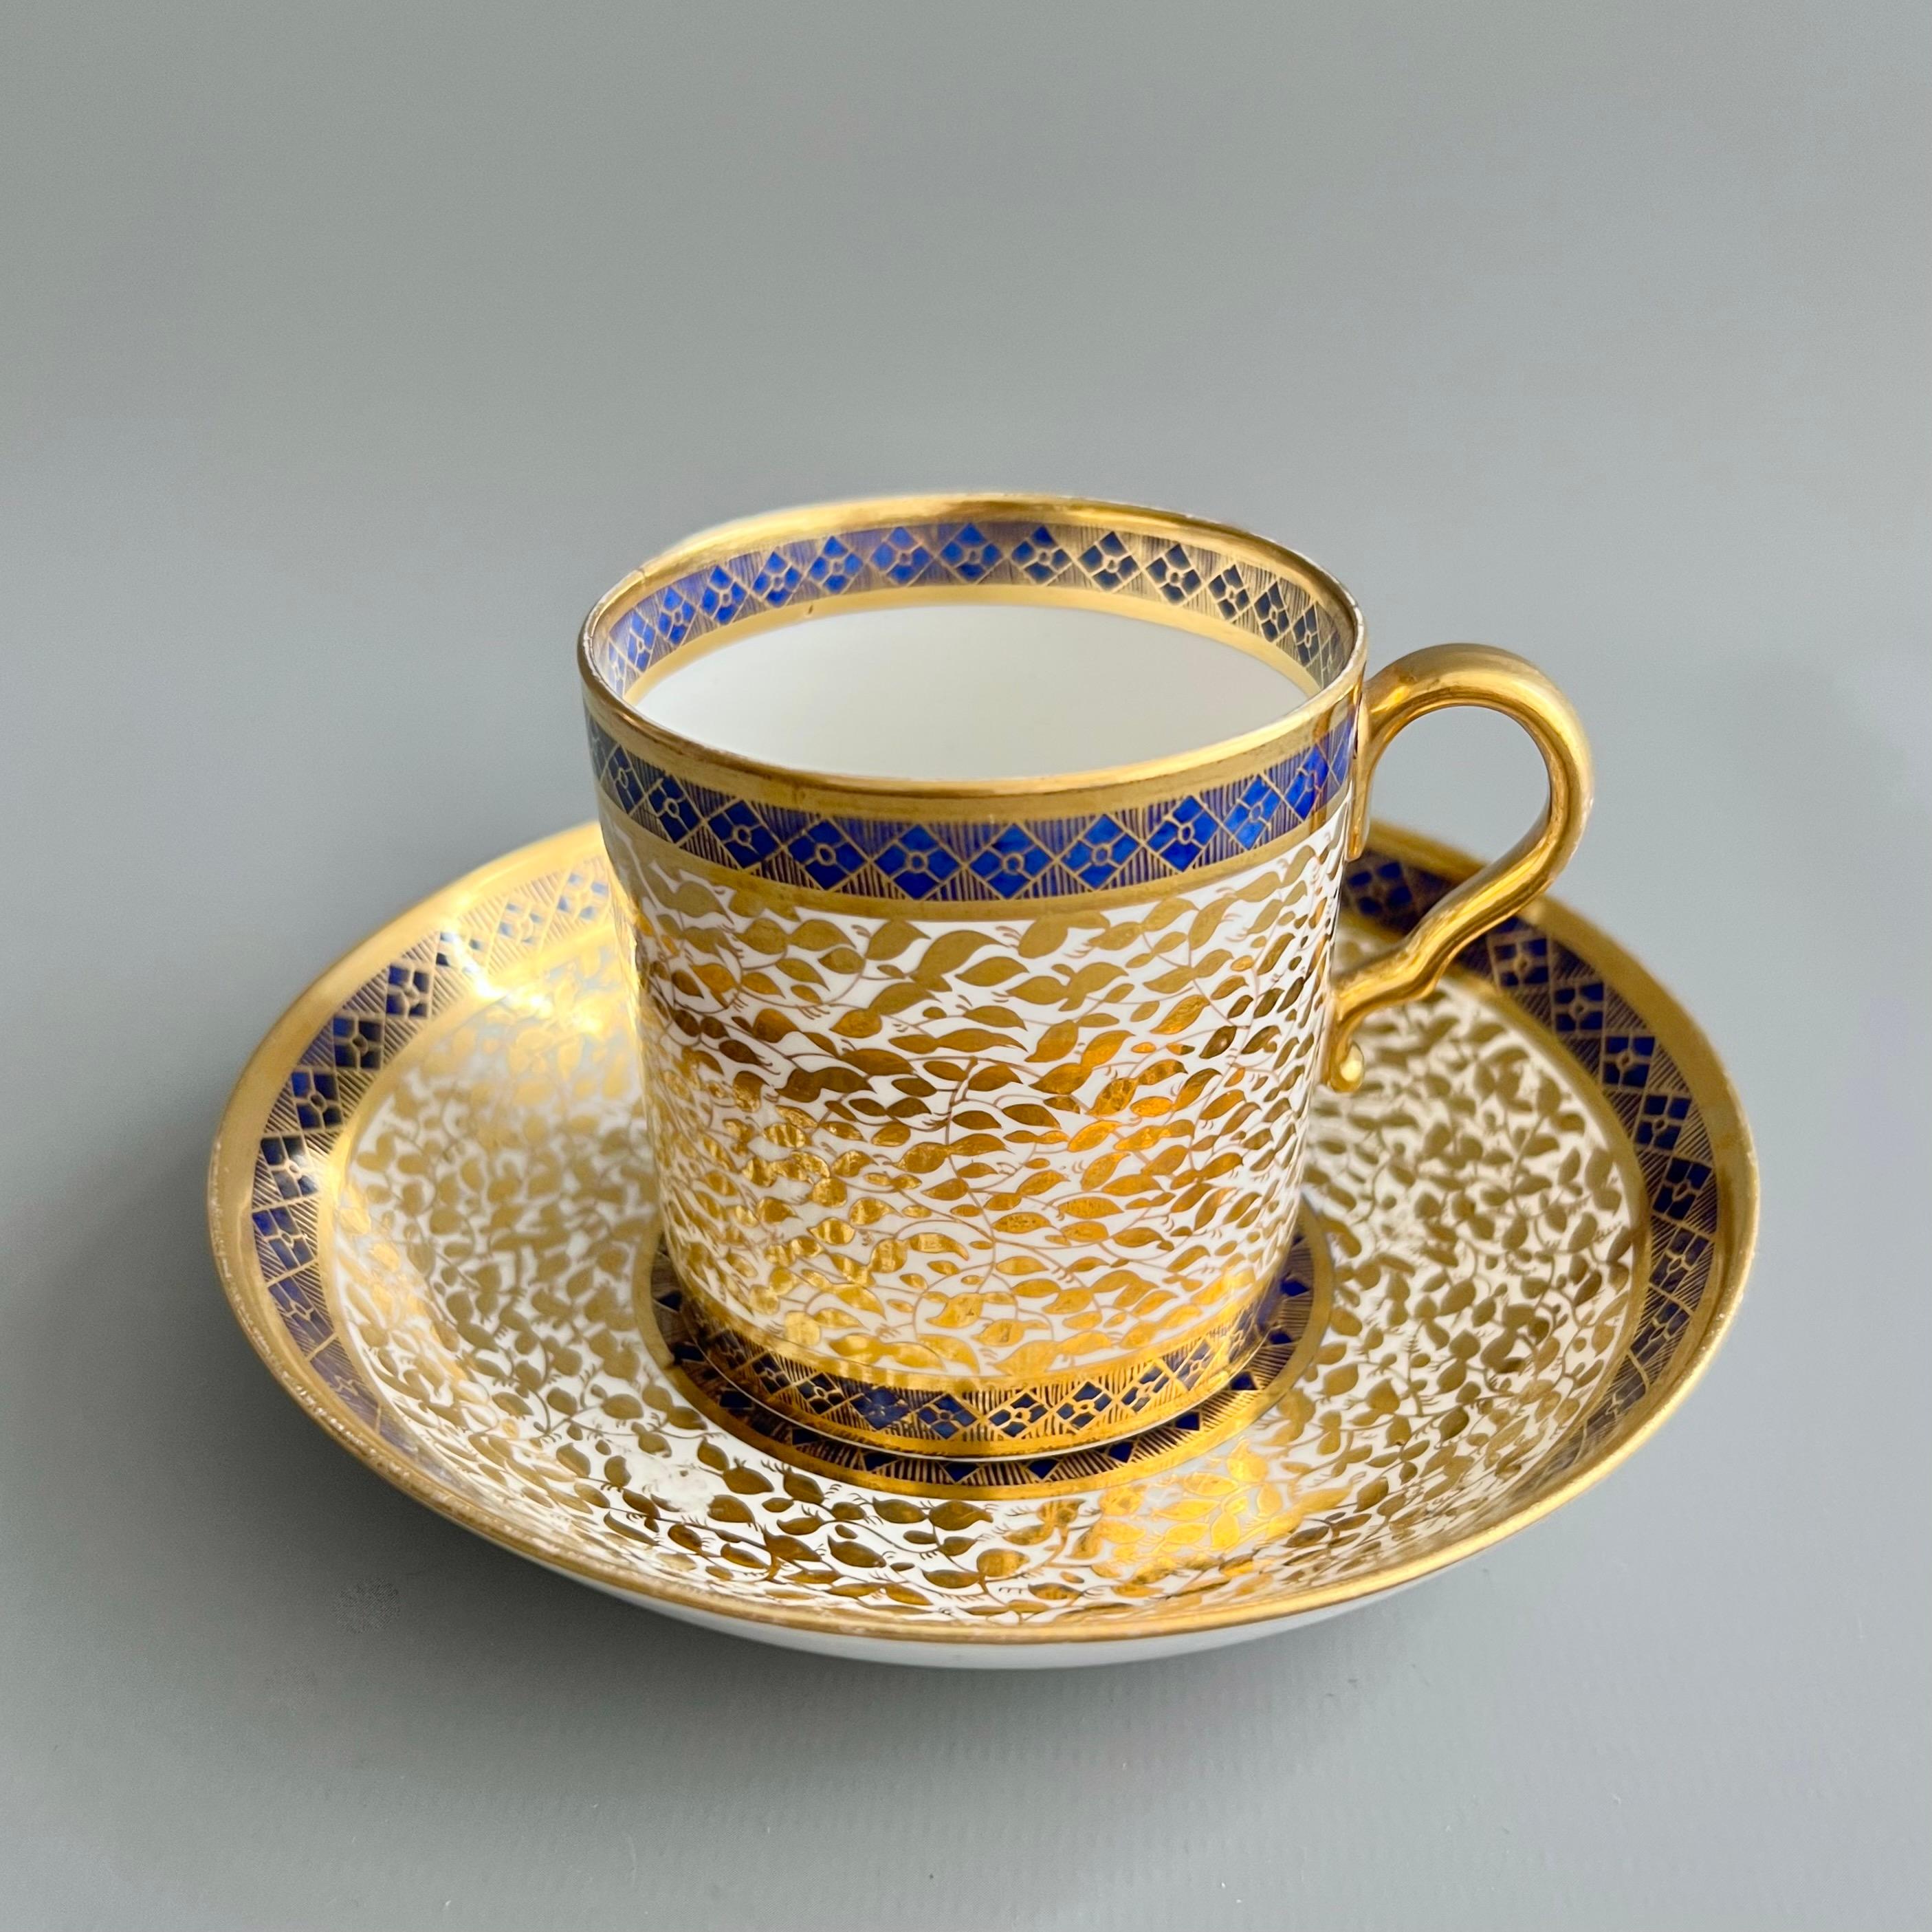 This is a beautiful coffee can and saucer made by Spode around 1806. The set is decorated in a stunning pattern of dense gilt foliage and a cobalt blue band in the Neoclassical taste.

Josiah Spode was the great pioneer among the Georgian potters in